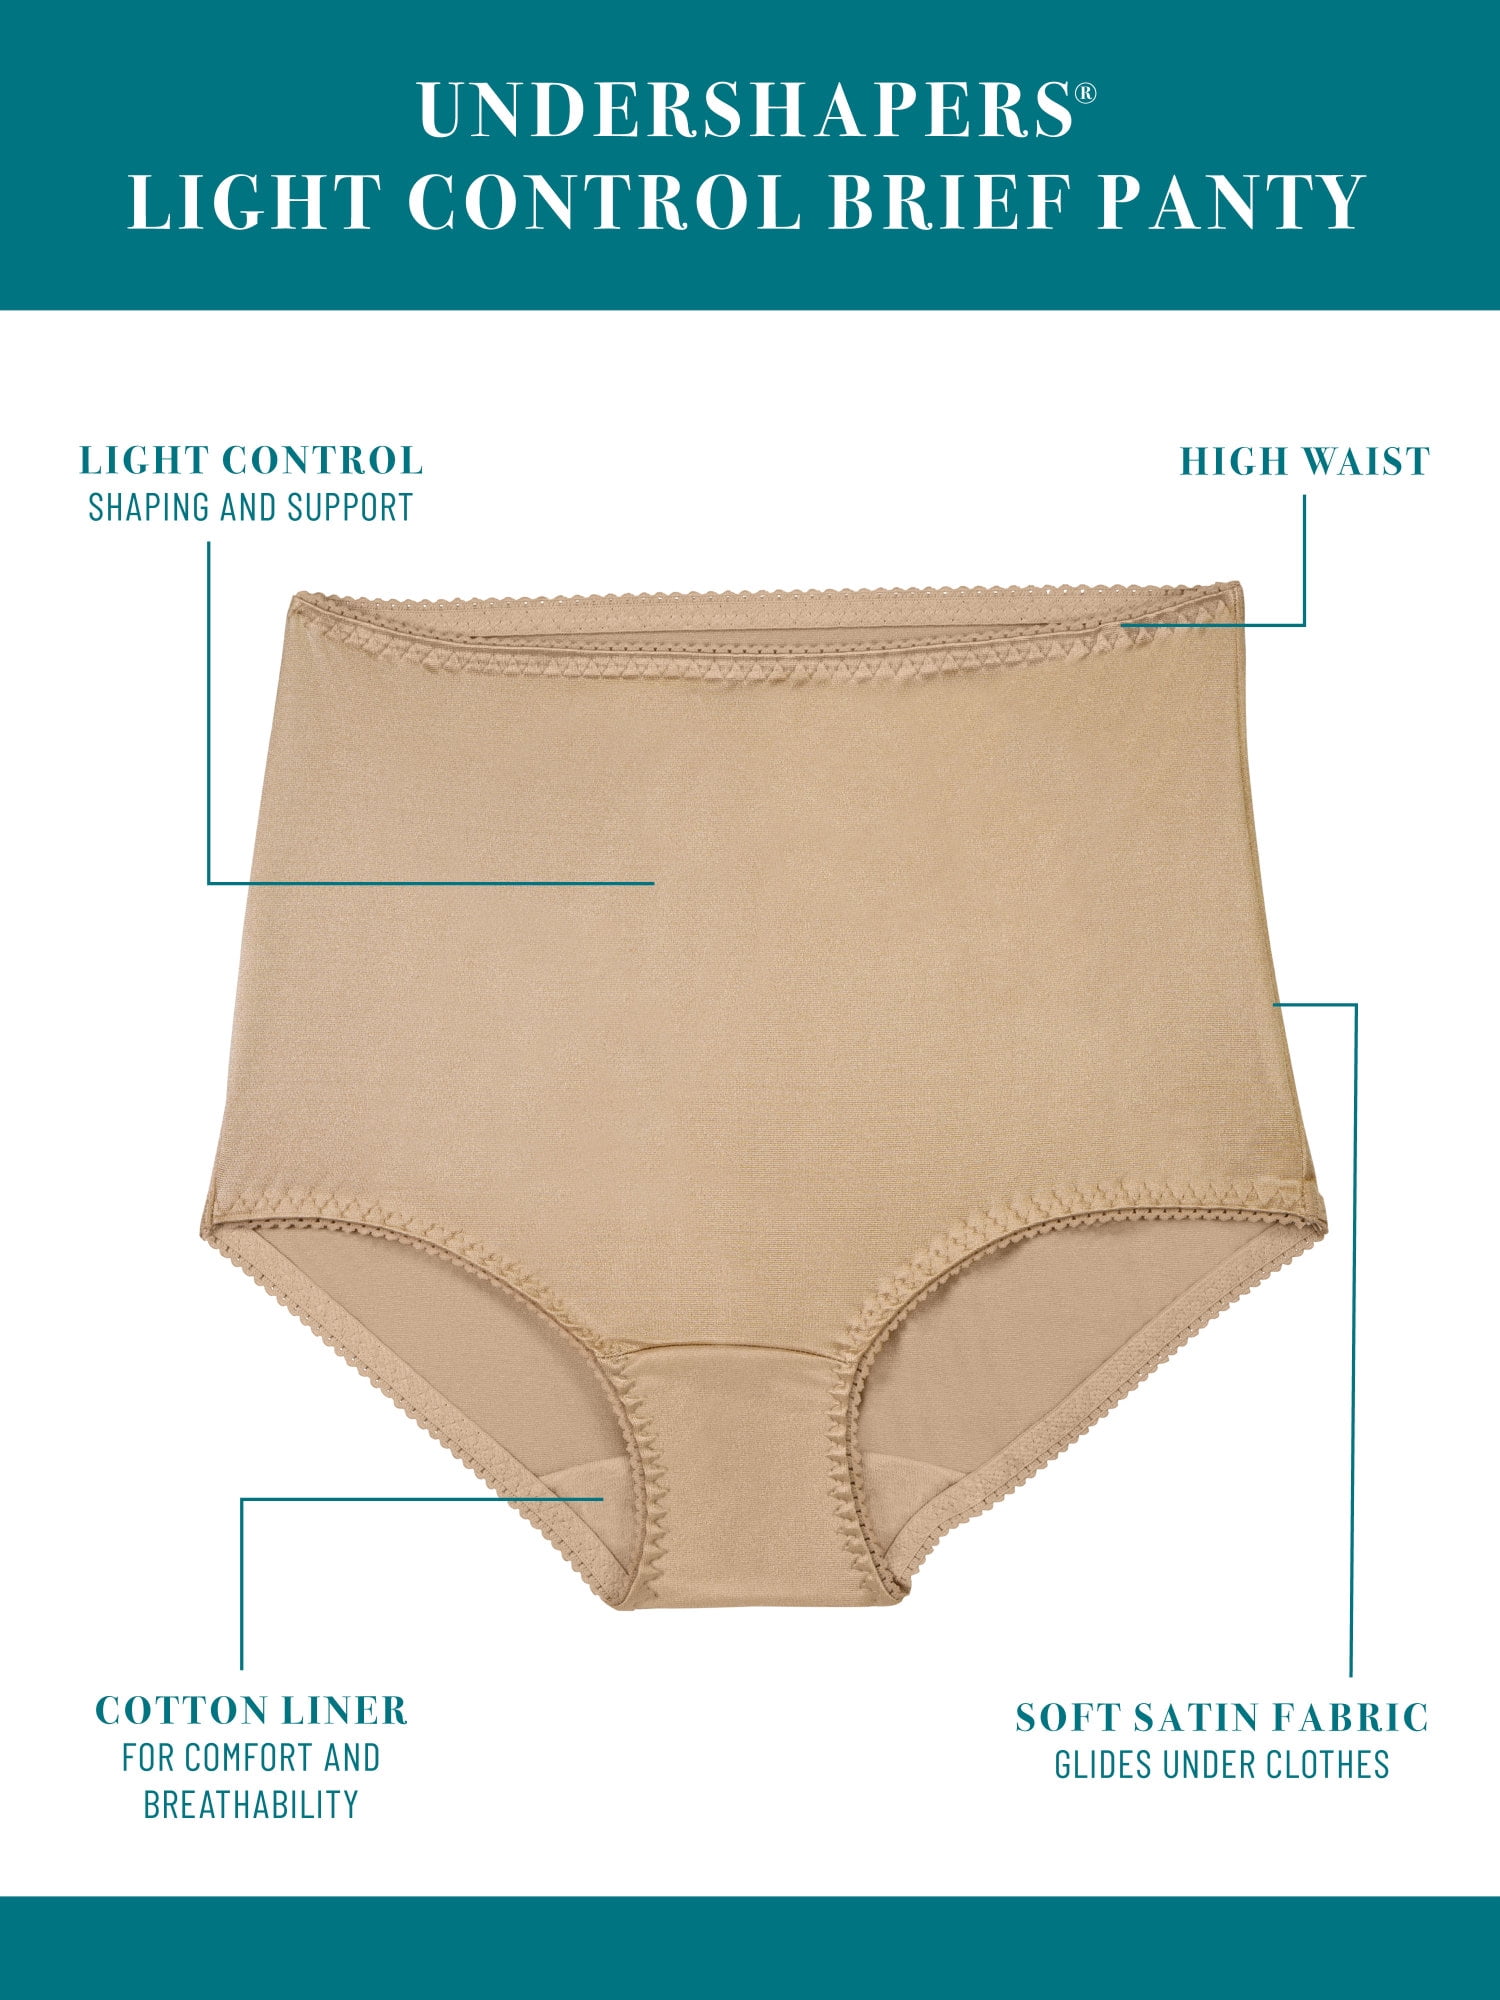 Underwear Fabric Types 101: How to Choose the Best Materials for